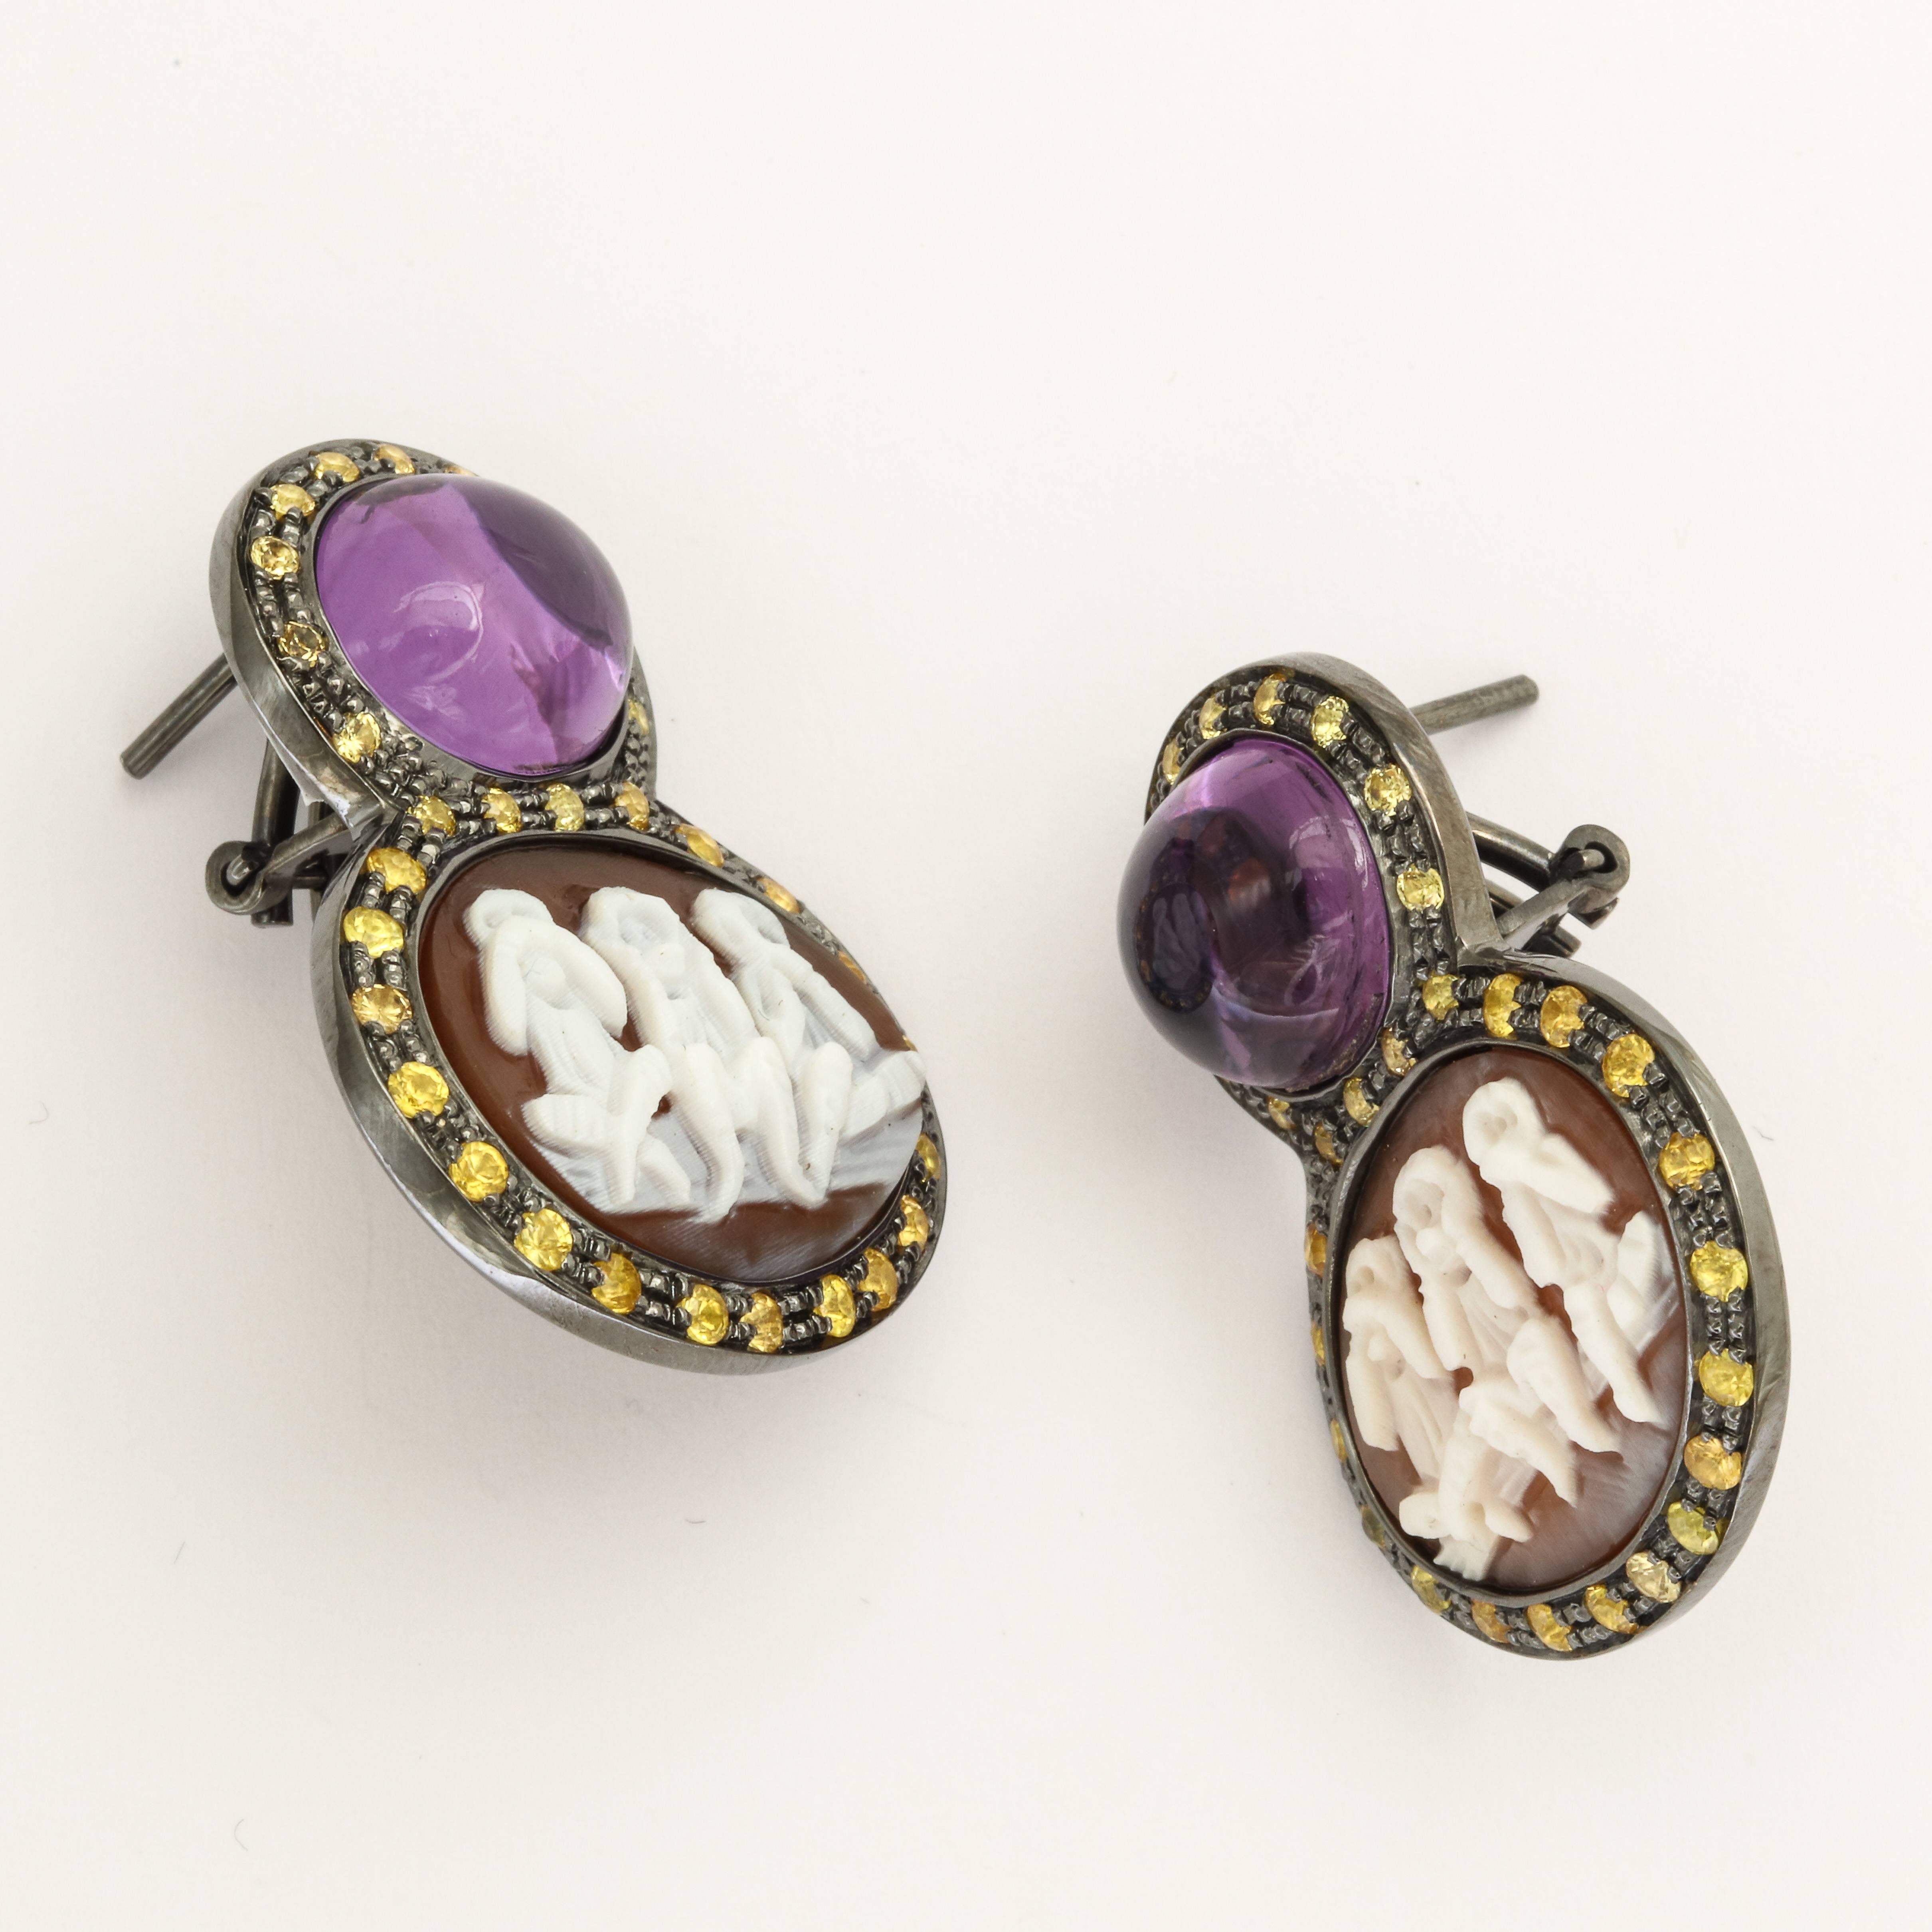 20mm sardonyx shell cameo hand-carved, set in sterling silver, black rhodium plated with 12.15ct amethyst and yellow sapphires.